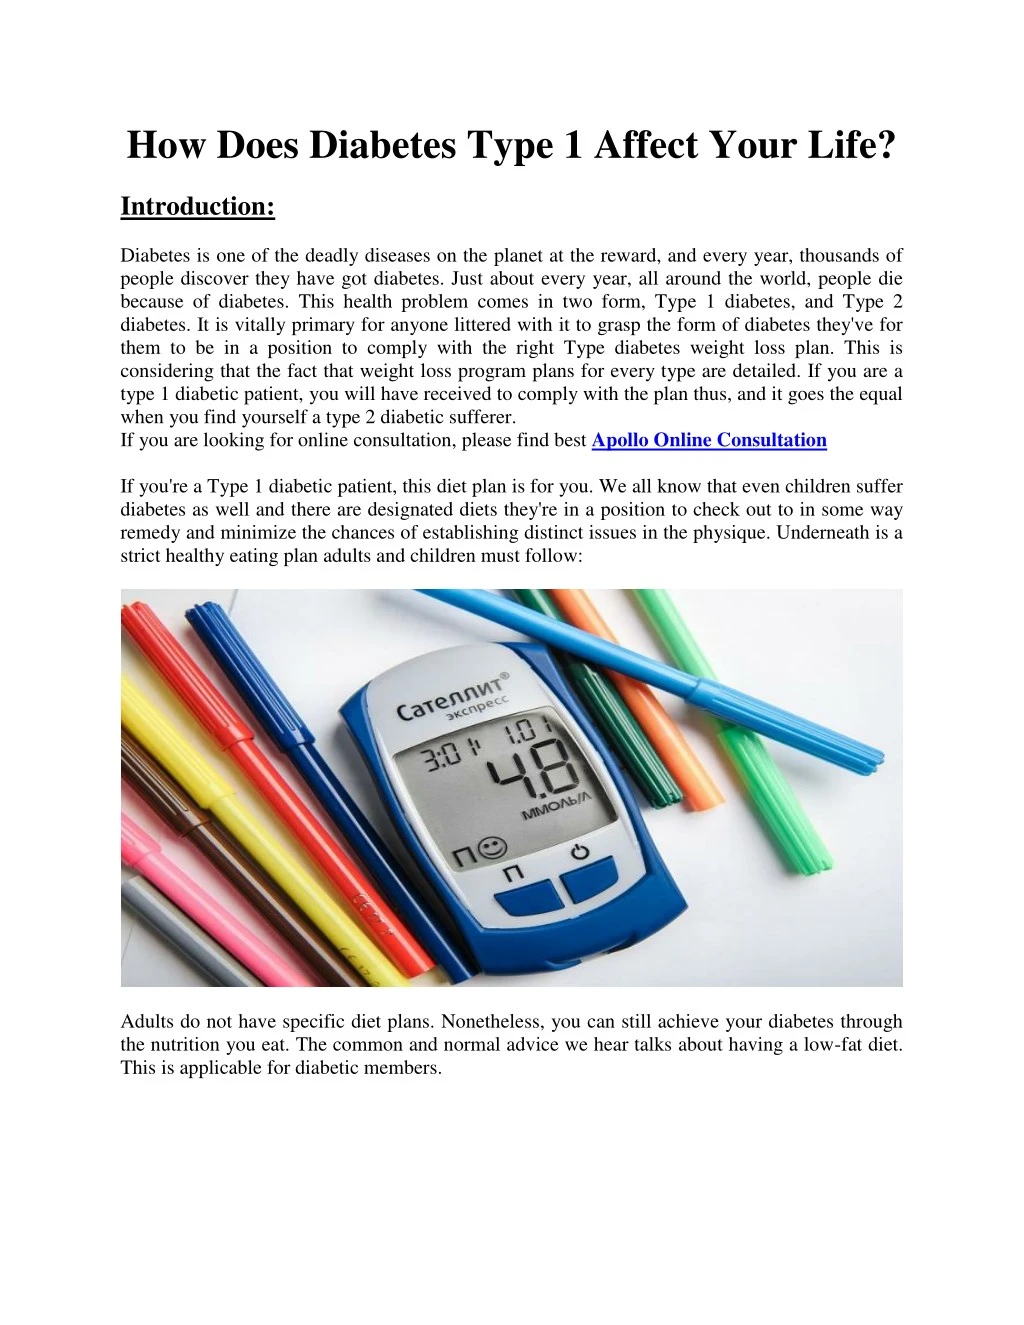 how does diabetes type 1 affect your life